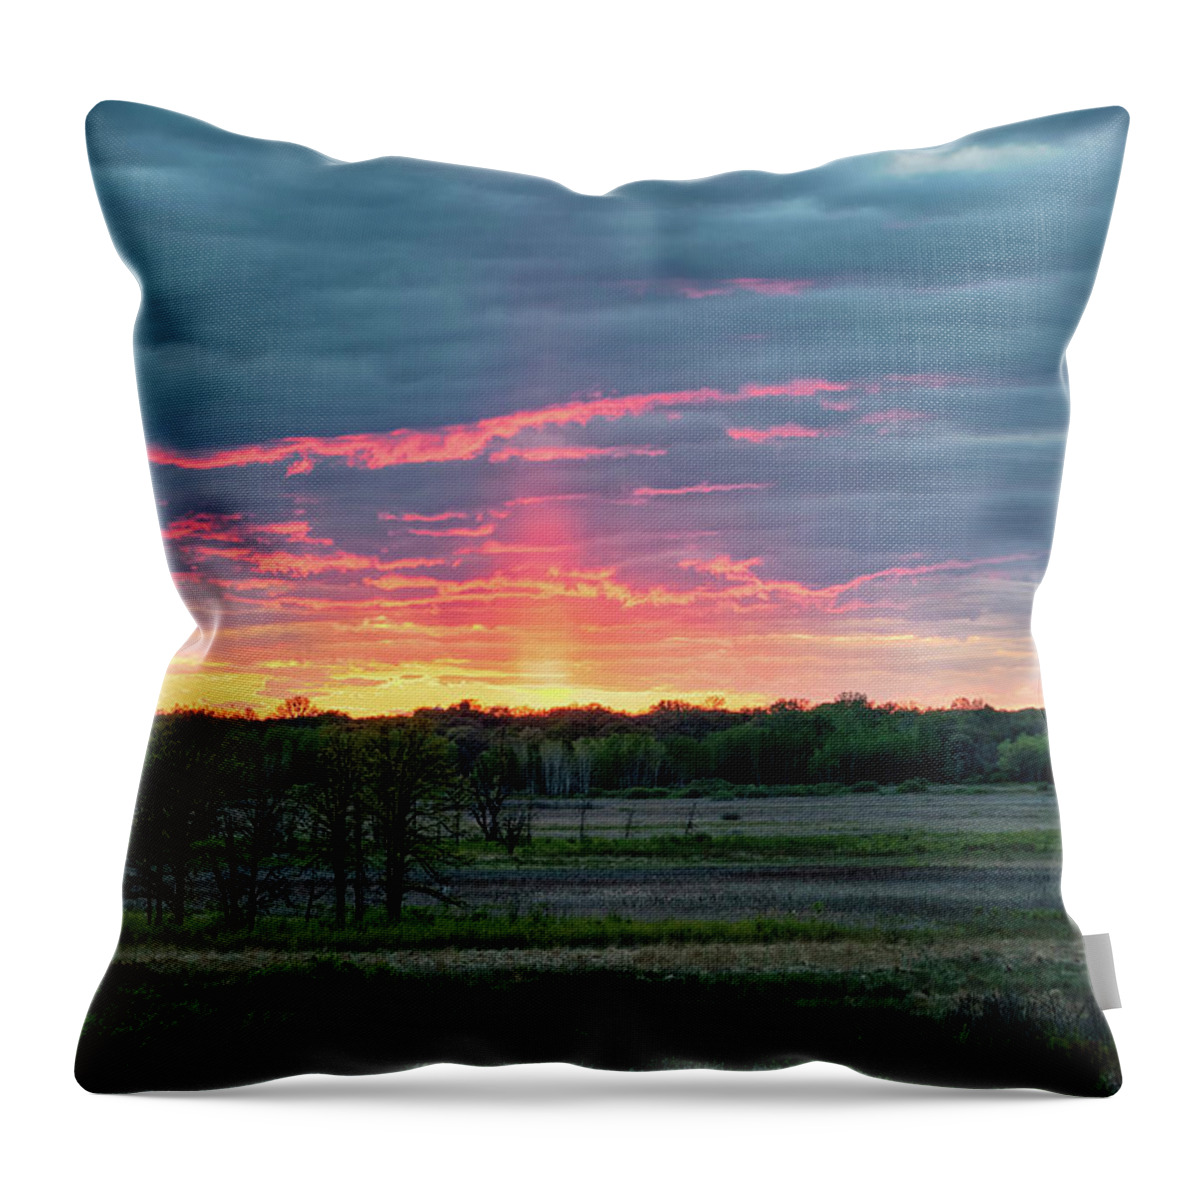  Throw Pillow featuring the photograph Spring Sunset by Dan Hefle